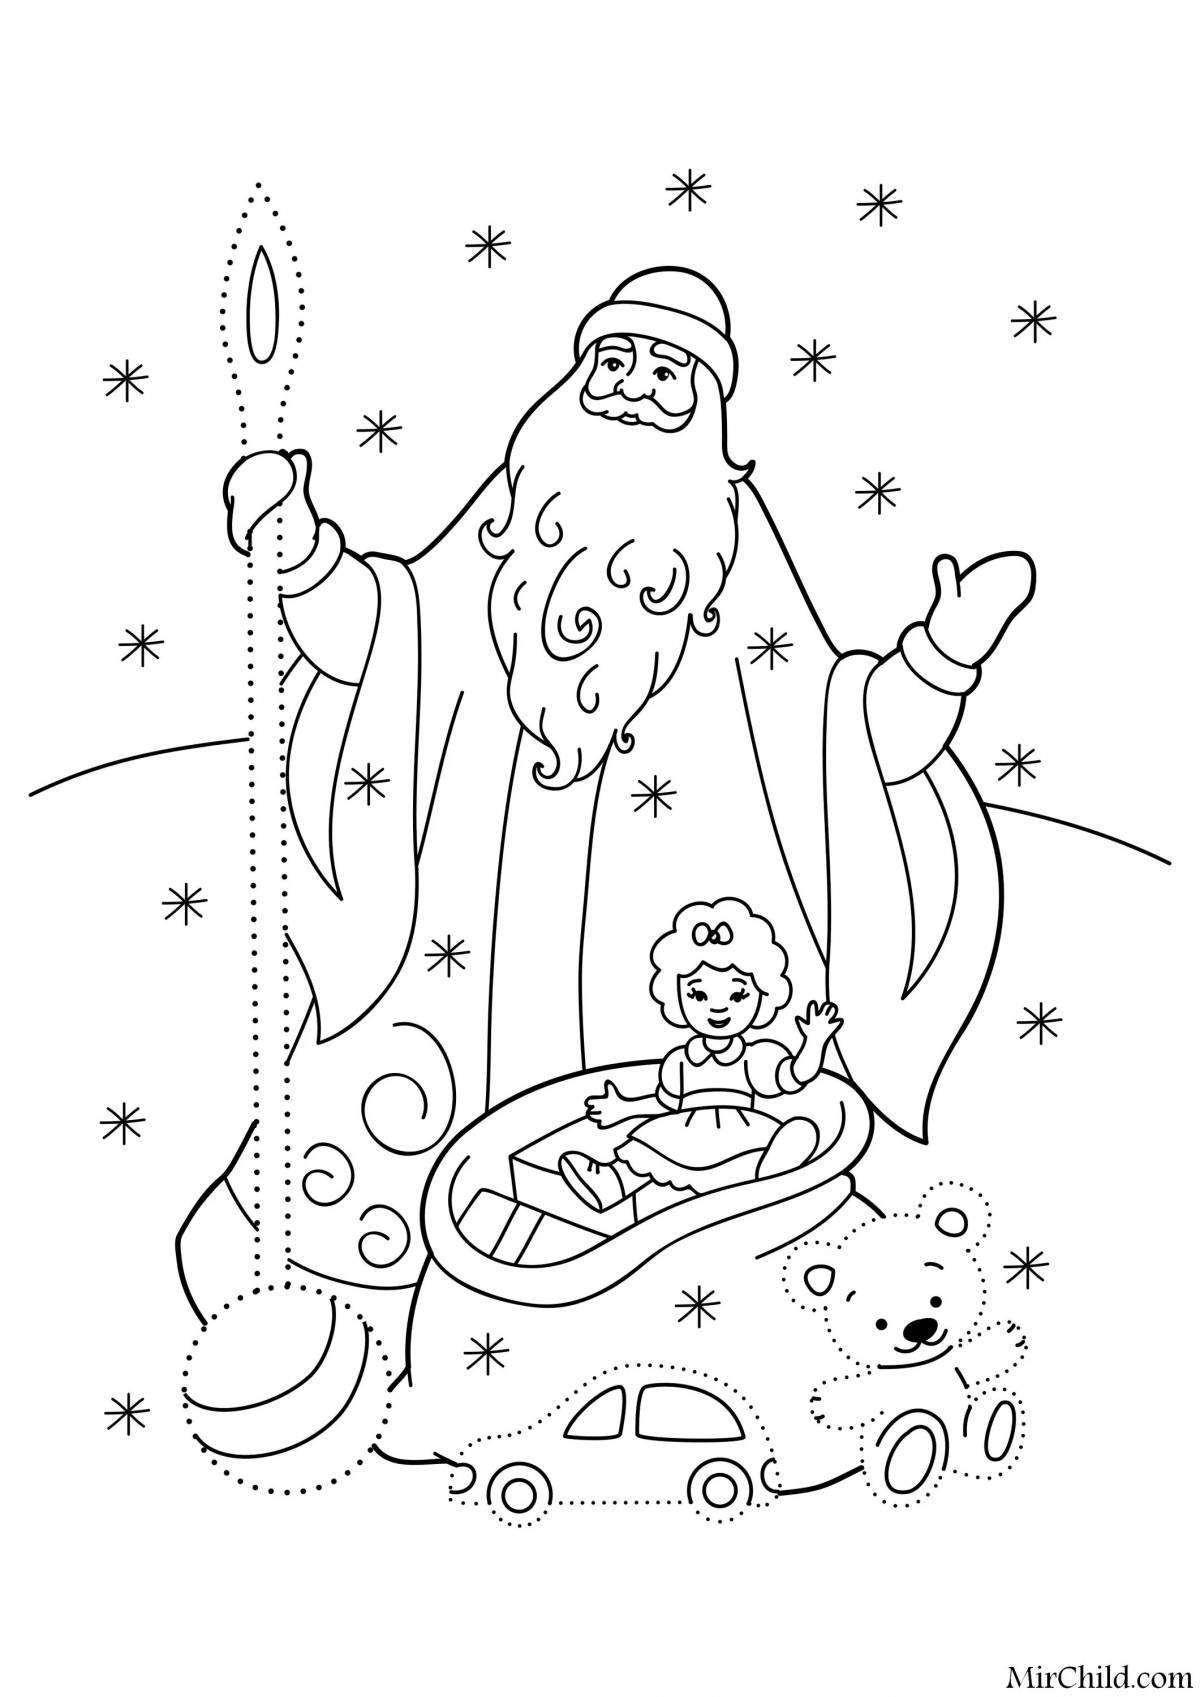 Incredible Christmas coloring book for kids